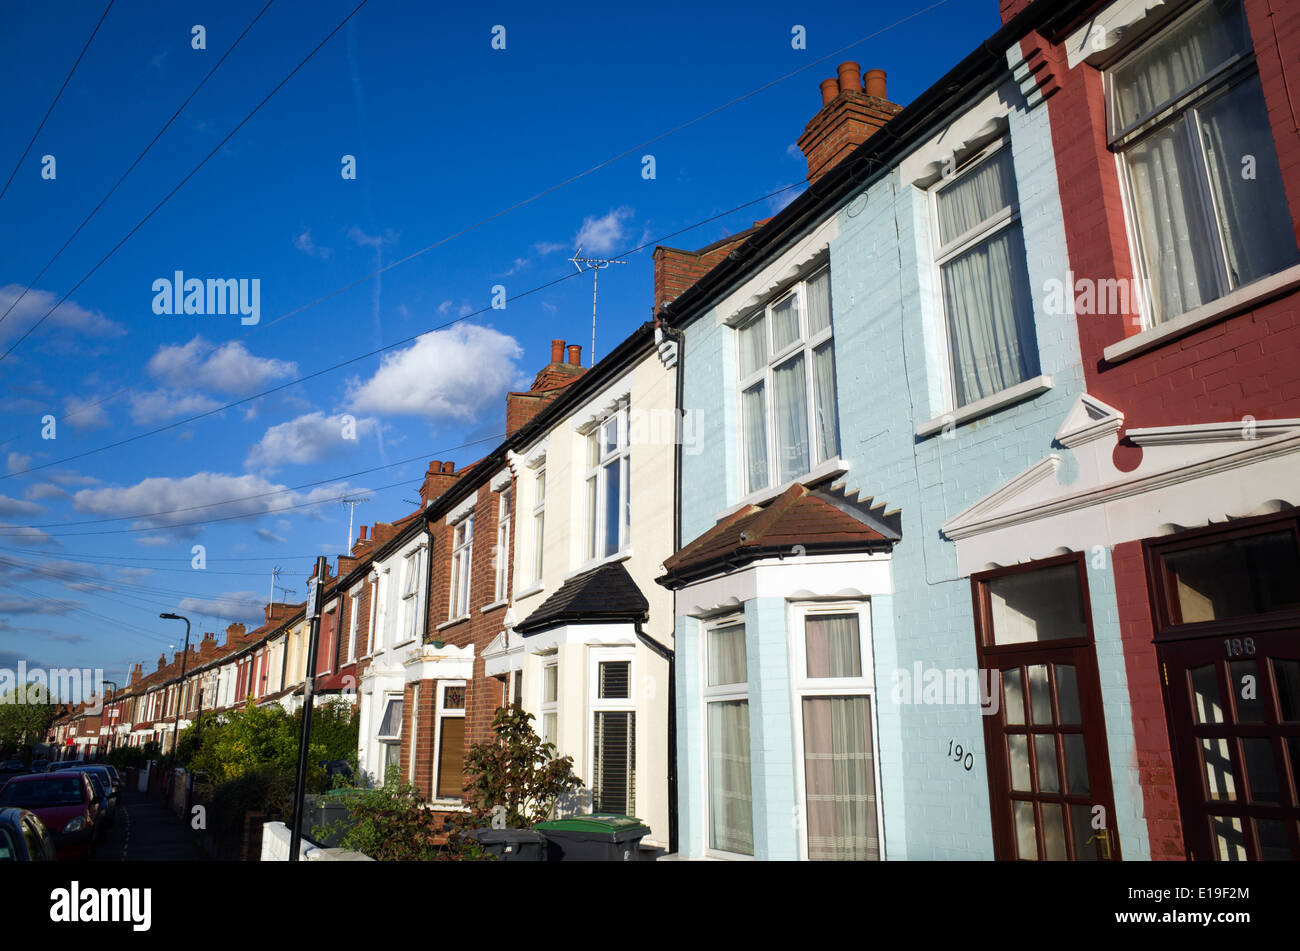 Row of terraced houses in Haringey, North London, England, UK Stock Photo